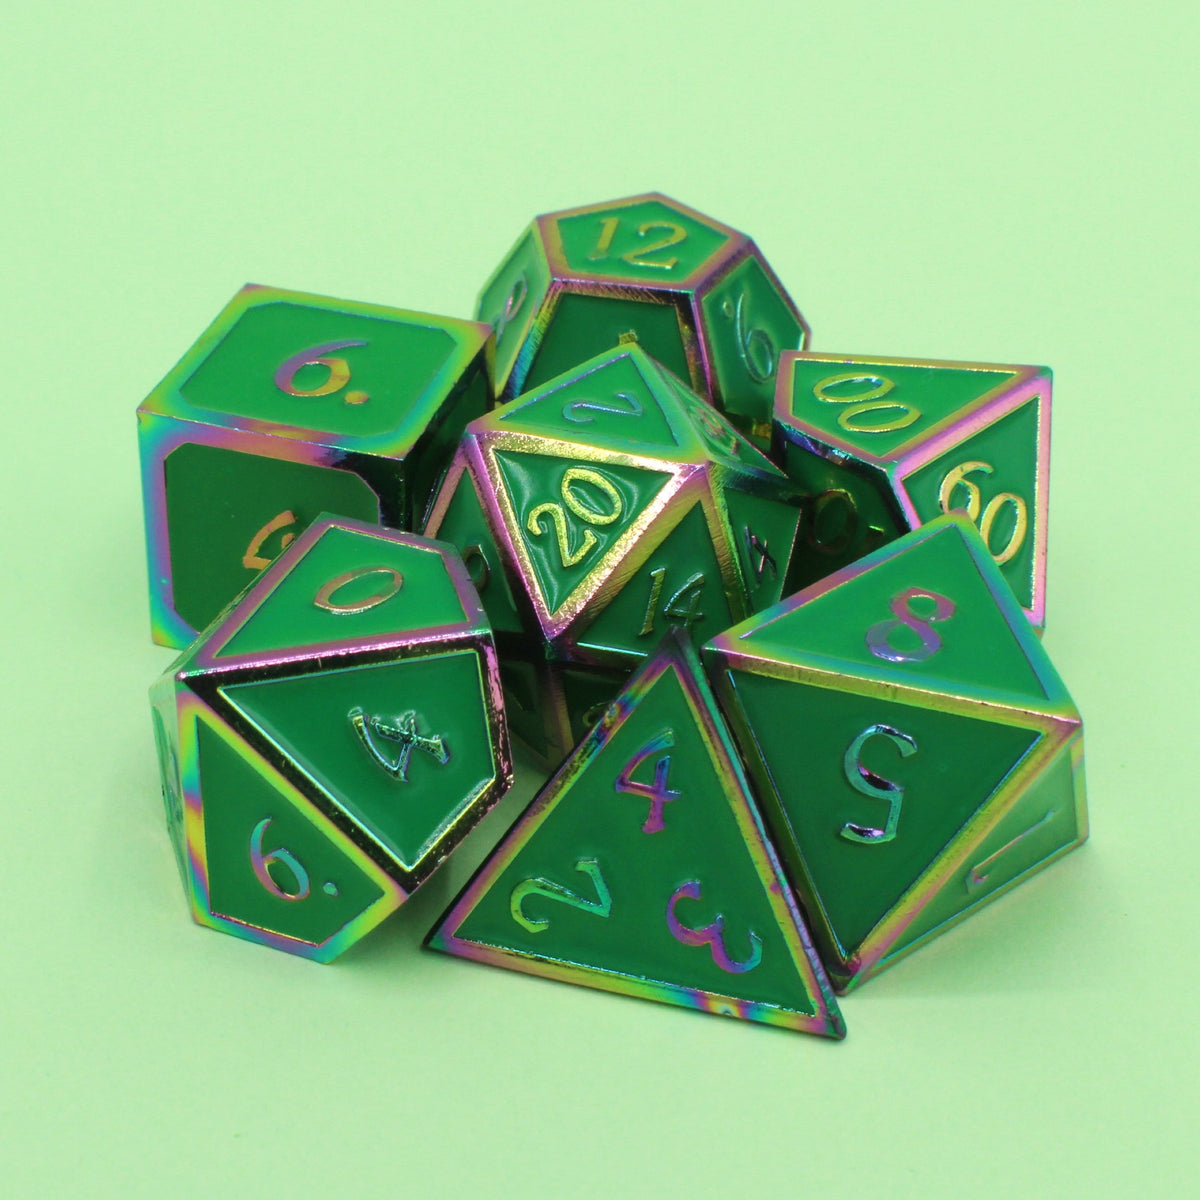 Green and Rainbow Framed Metal Dice Set!